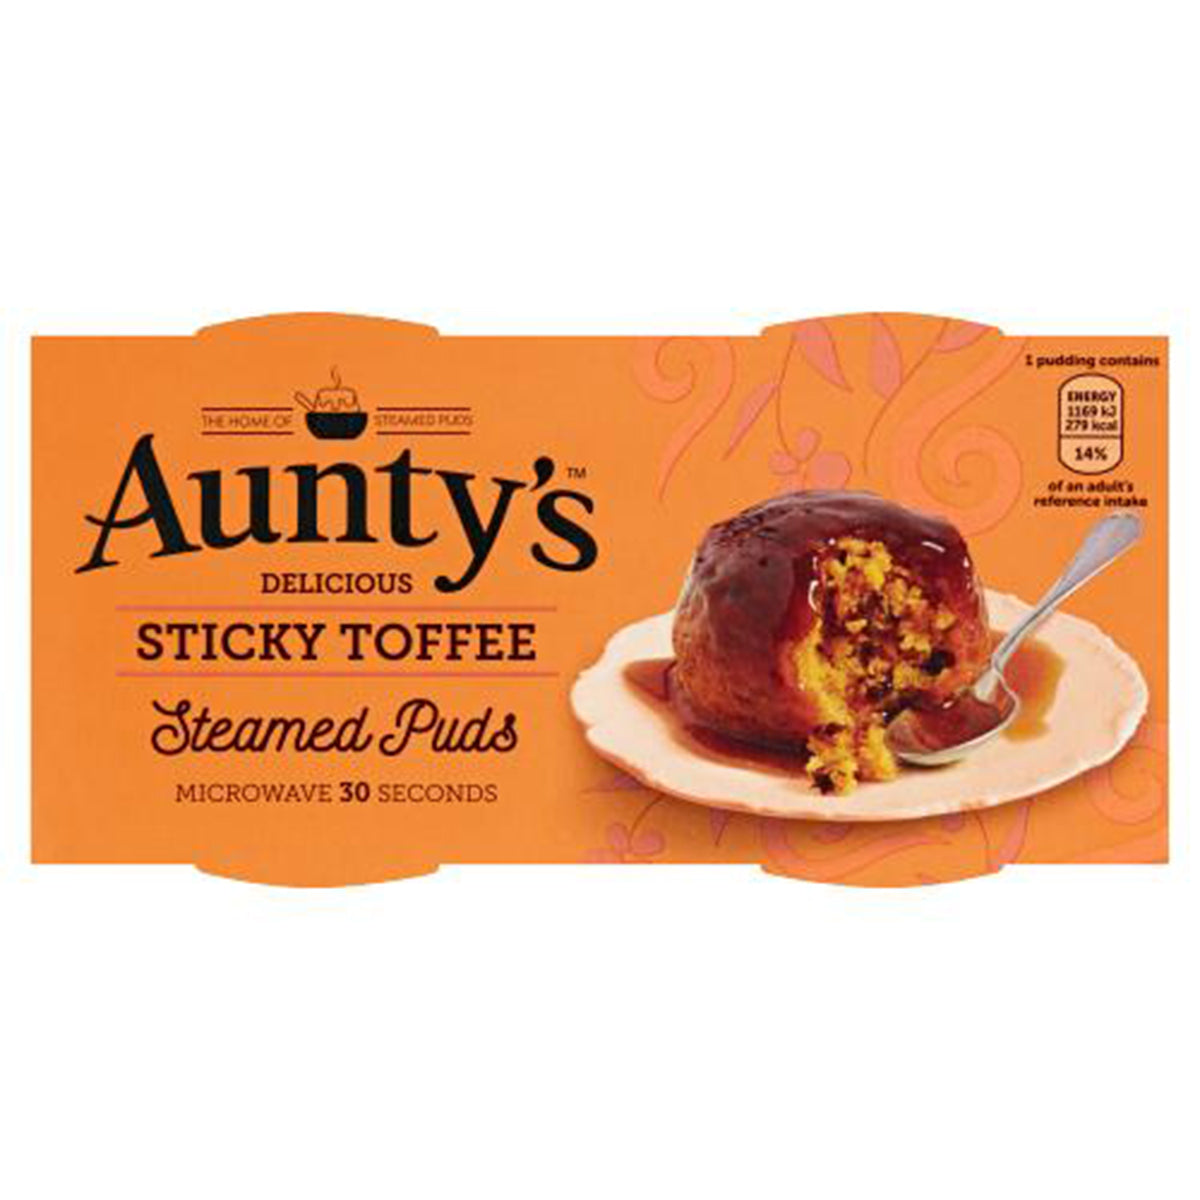 Packaging of Aunty's Delicious Sticky Toffee Steamed Puds - 190g, ready in 30 seconds.